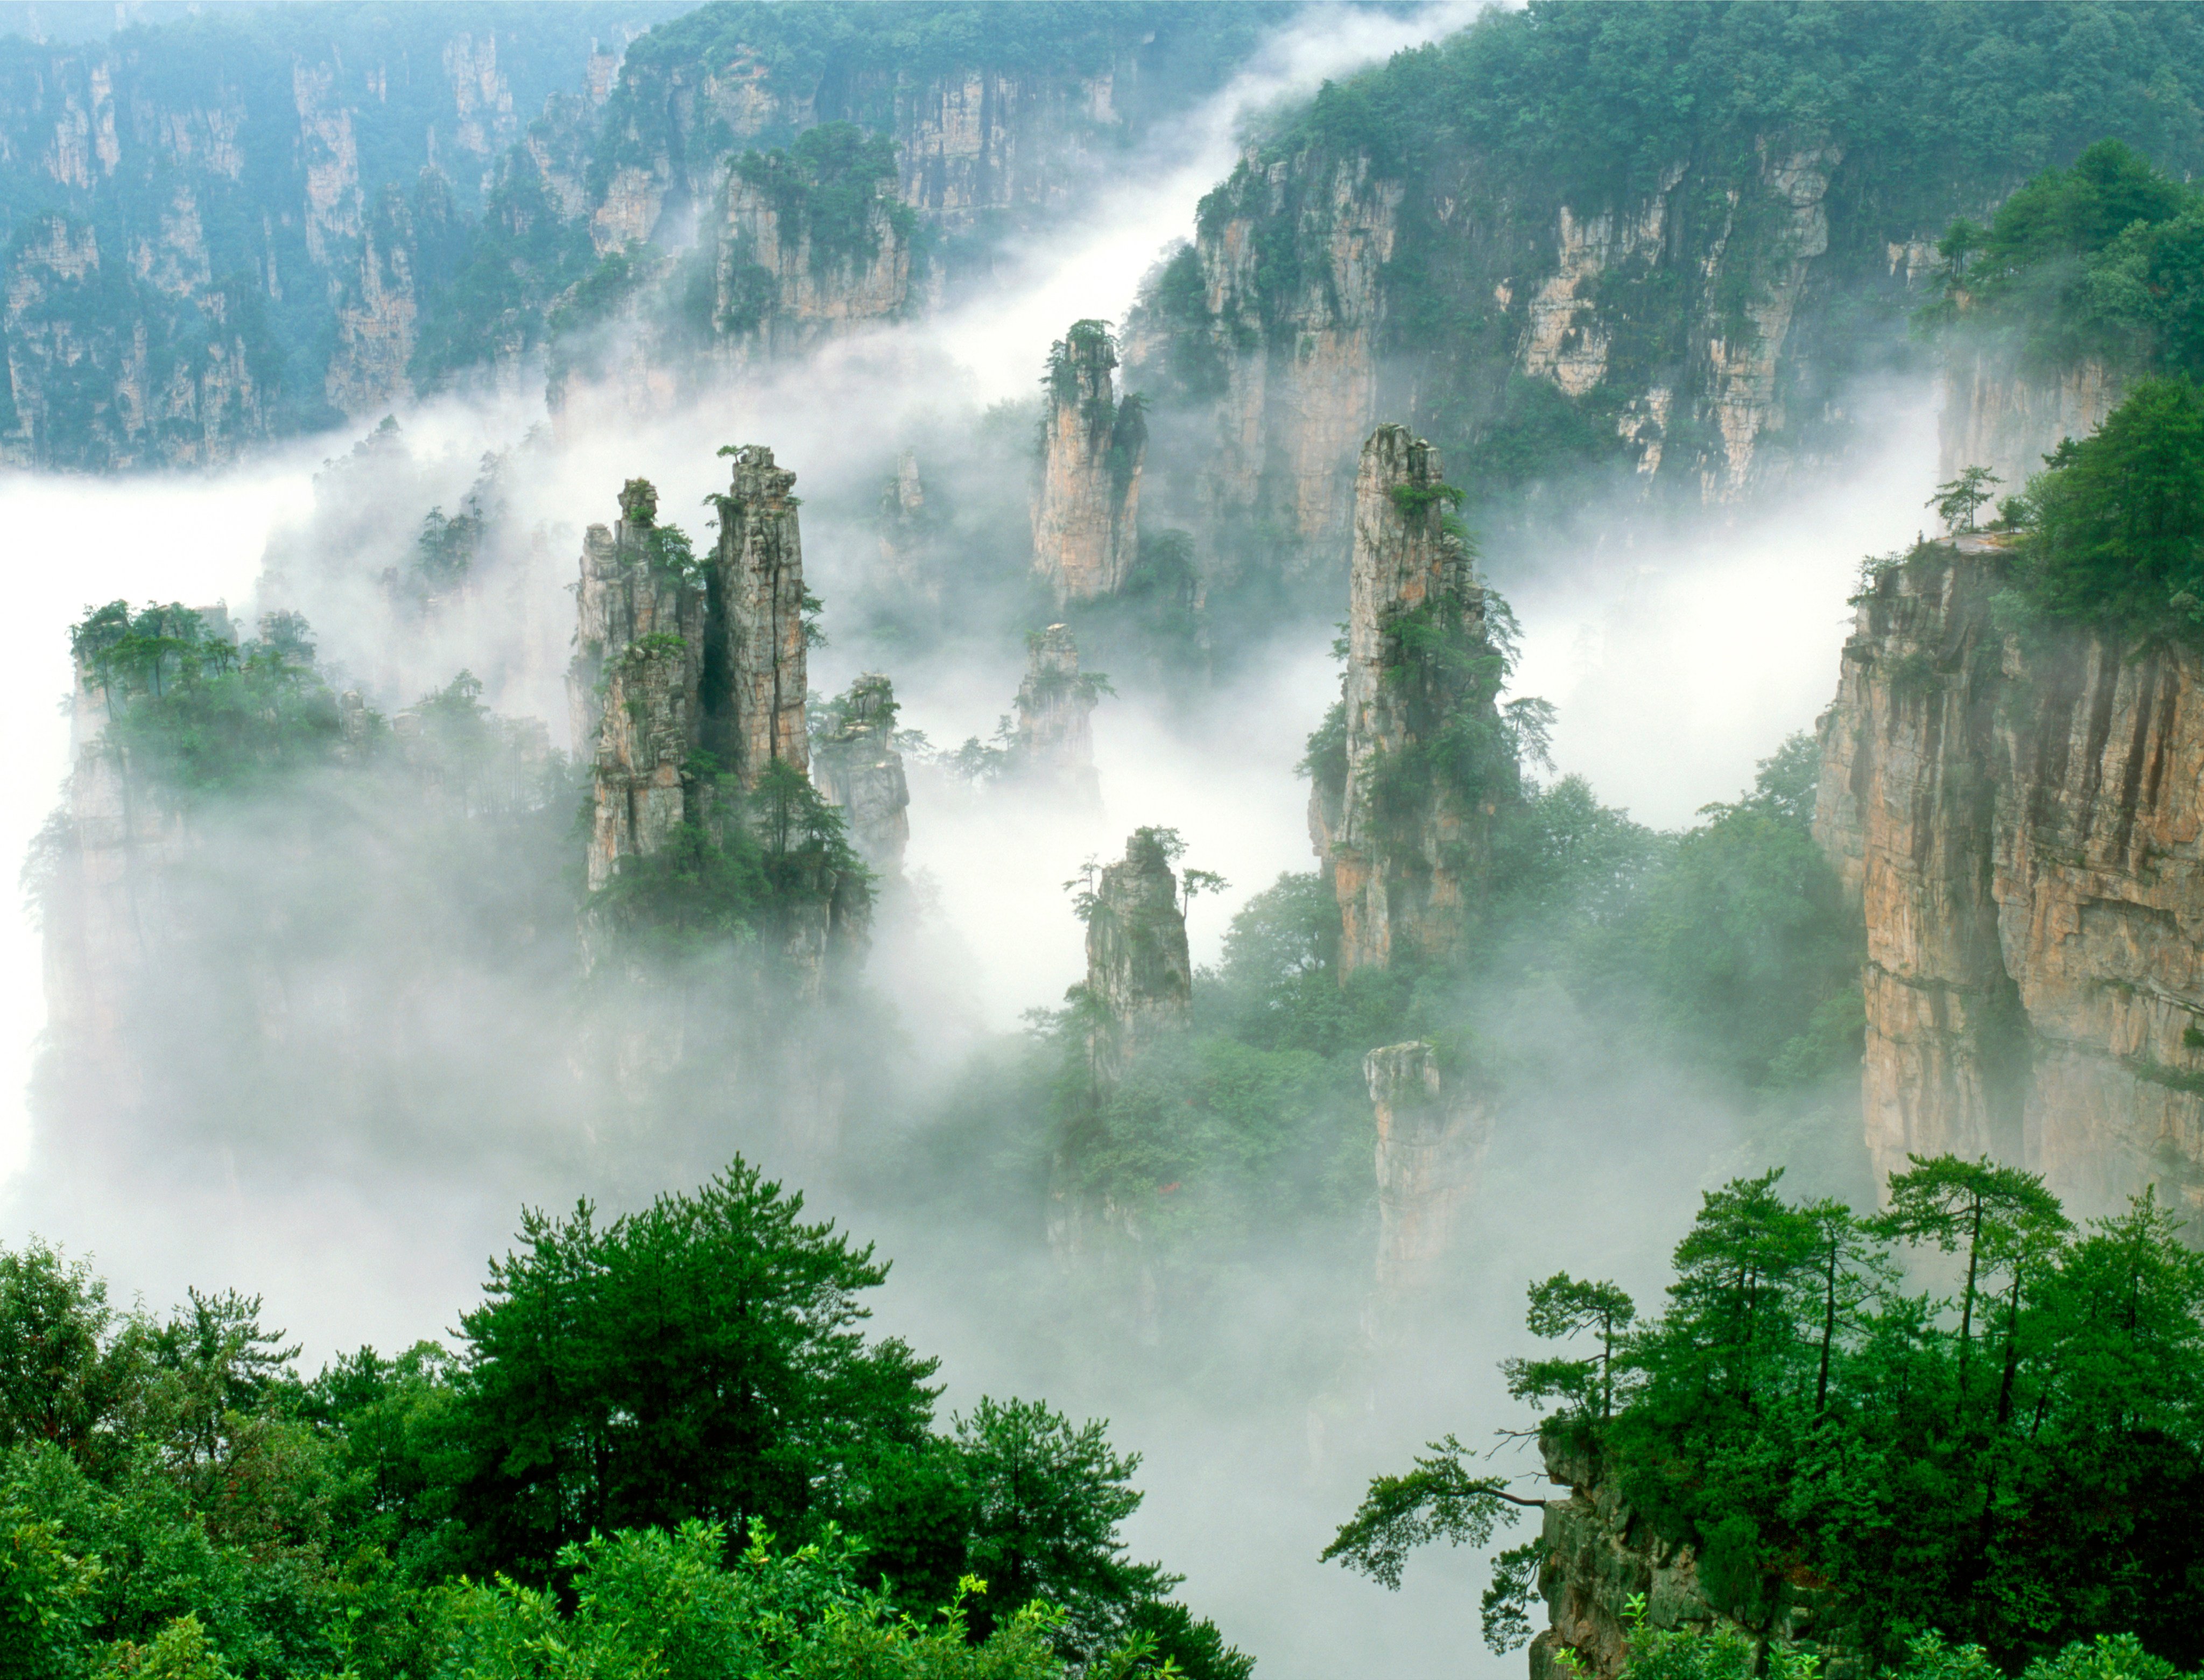 Zhangjiajie National Park has inspired many works of art. Photo: Getty Images